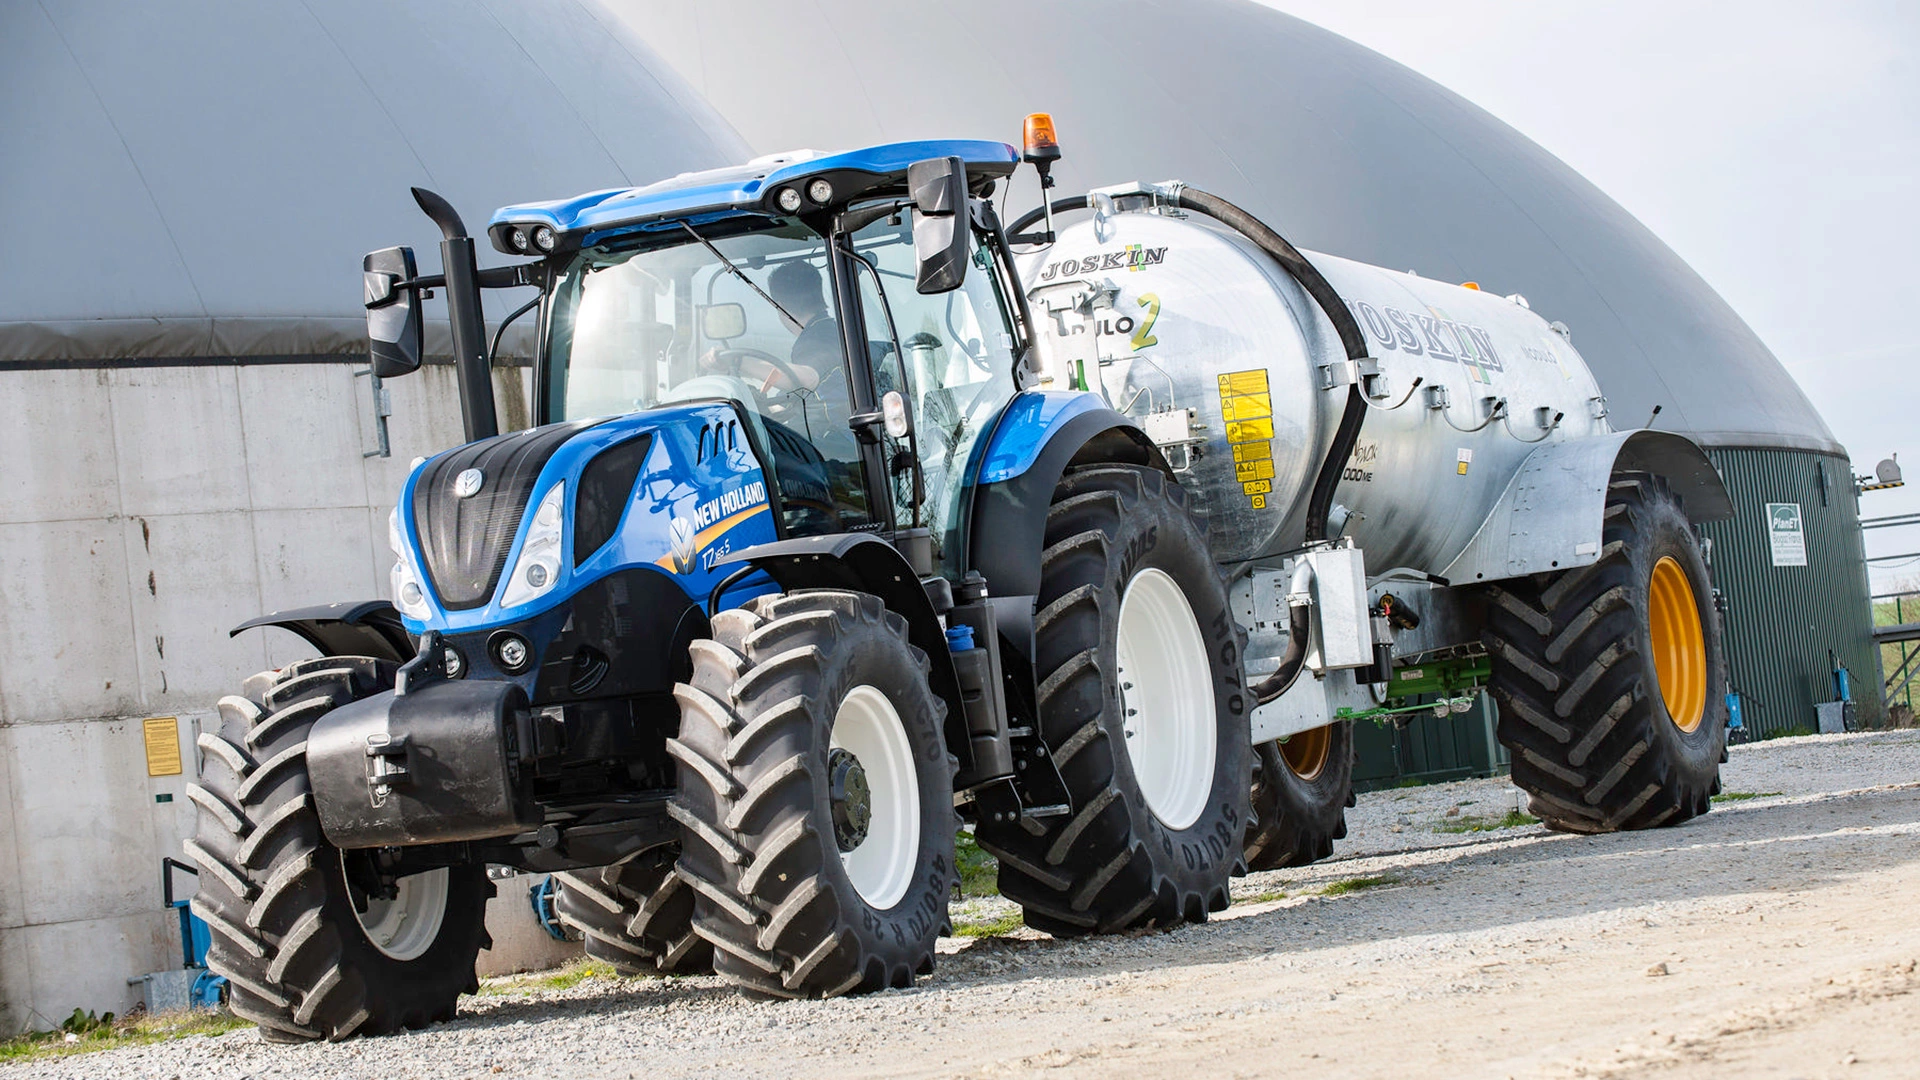 S tractor. Трактор New Holland t7. Трактор Нью Холланд т 9000. New Holland t7060. New Holland t9000.